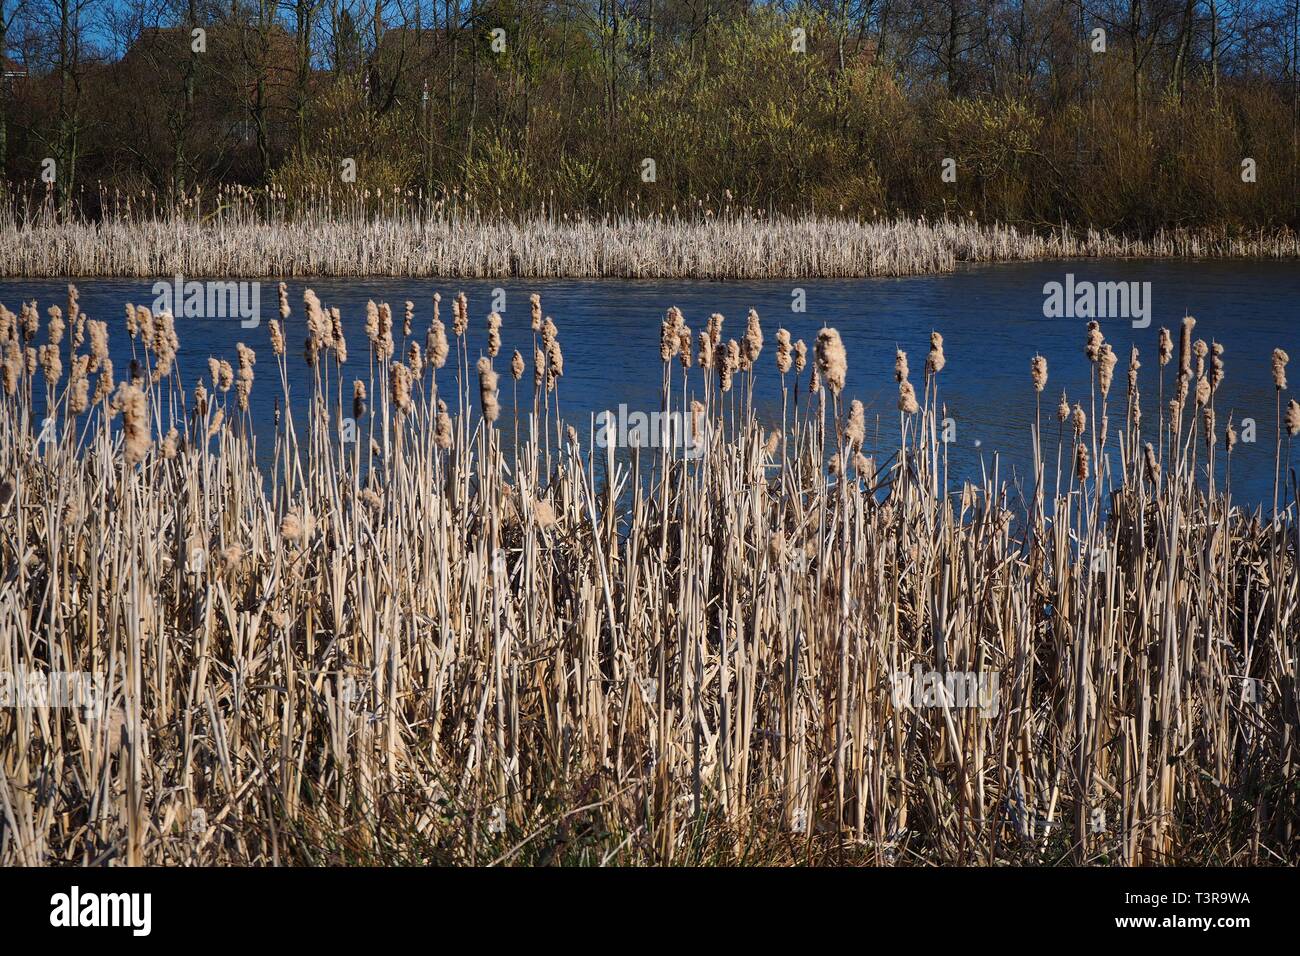 Bulrushes and reeds beside a lake at Filey Dams nature reserve, North Yorkshire, England Stock Photo